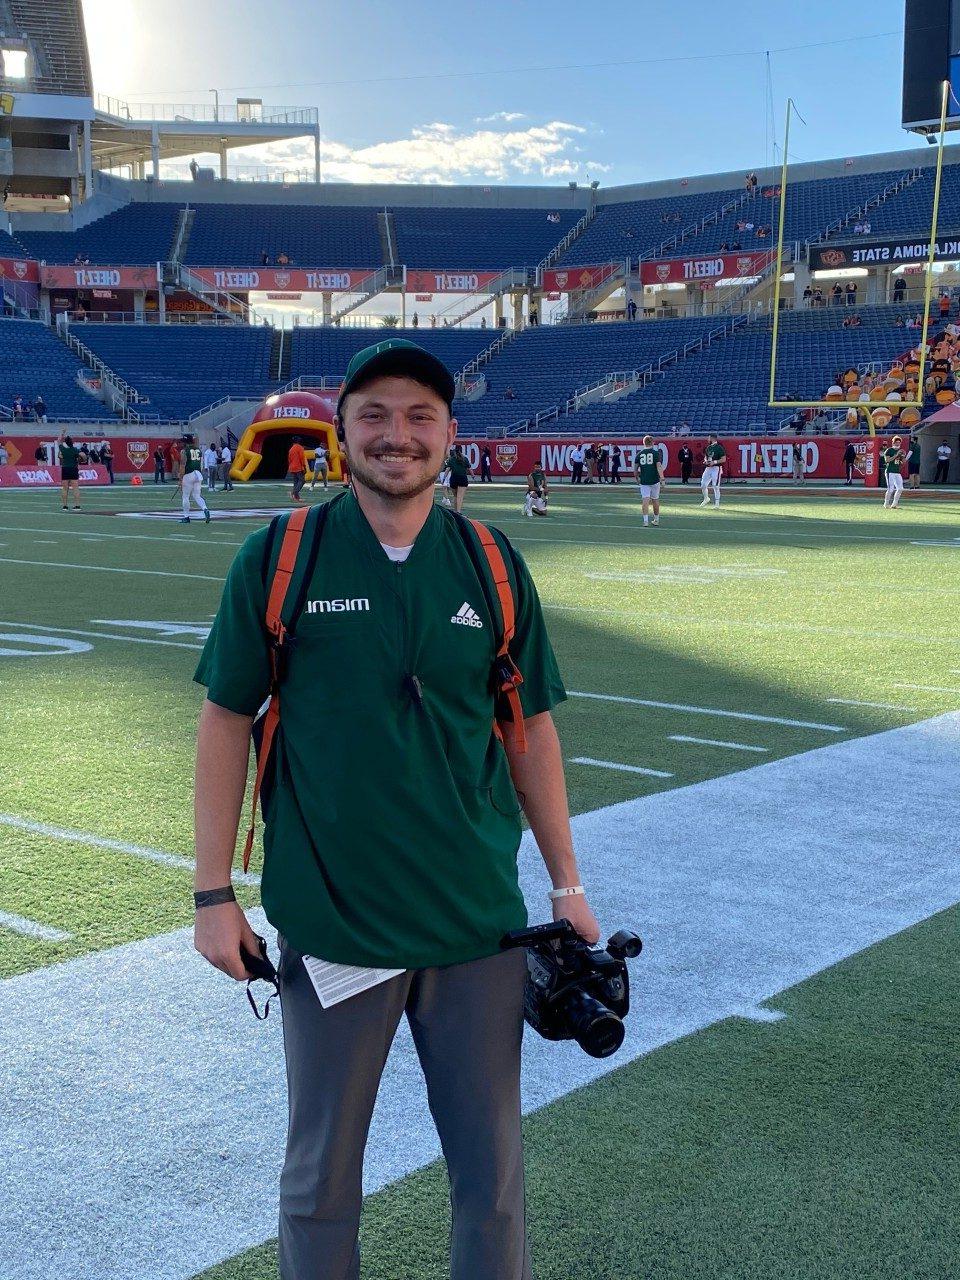 Ben graduated with a degree in multimedia journalism and a concentration in sports media and analytics. 通过第一年的体验项目, he became involved with HokieVision and got hands-on experience with video production and broadcasting. His experience led to an internship with the Minnesota Vikings as their full-time video intern. Ben now works as the assistant video coordinator for the University of Miami football program. 